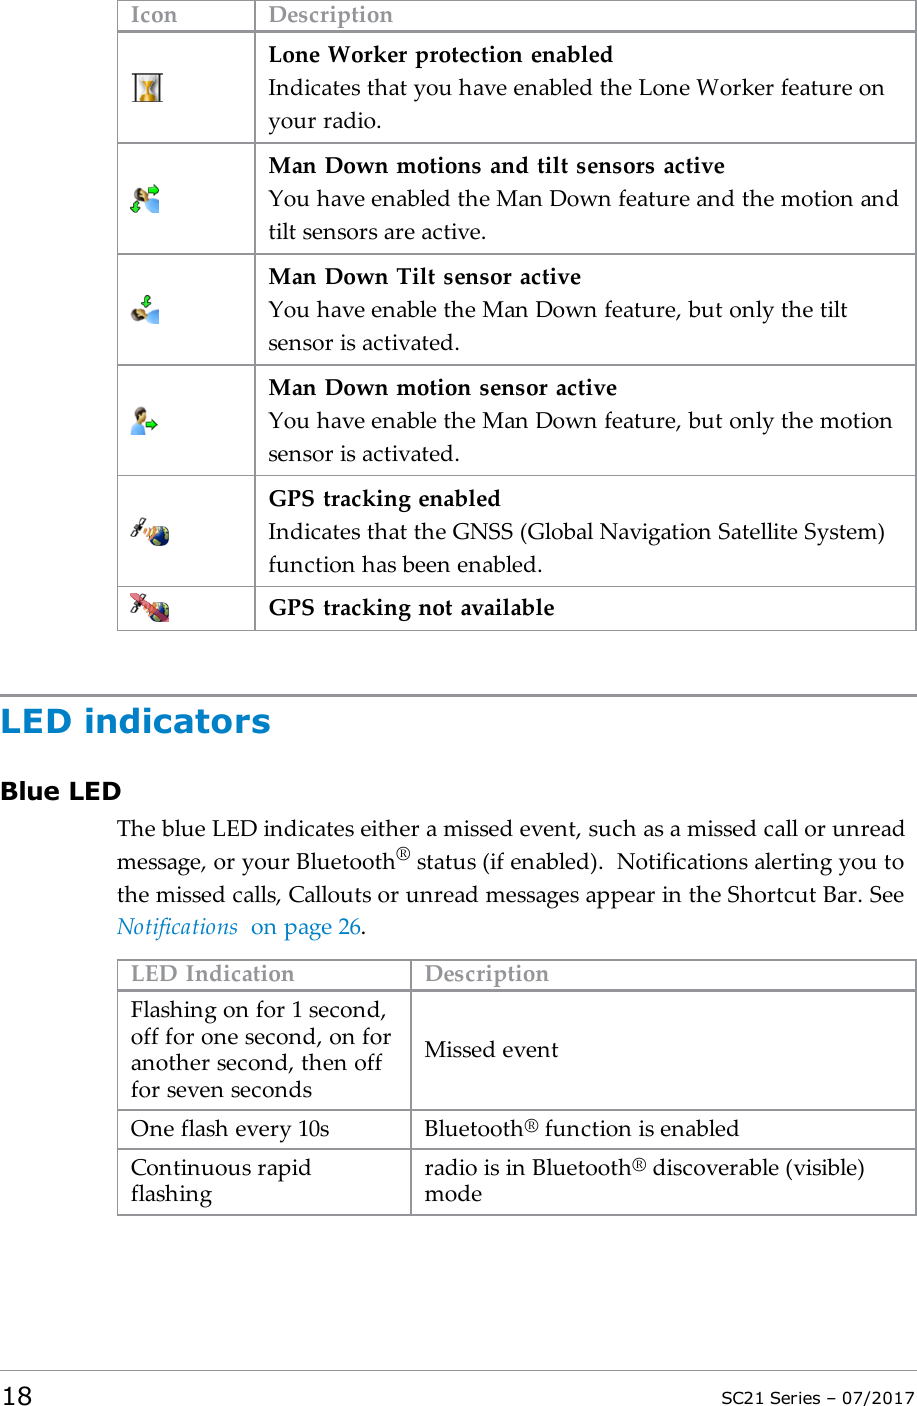 Icon DescriptionLone Worker protection enabledIndicates that you have enabled the Lone Worker feature onyour radio.Man Down motions and tilt sensors activeYou have enabled the Man Down feature and the motion andtilt sensors are active.Man Down Tilt sensor activeYou have enable the Man Down feature, but only the tiltsensor is activated.Man Down motion sensor activeYou have enable the Man Down feature, but only the motionsensor is activated.GPS tracking enabledIndicates that the GNSS (Global Navigation Satellite System)function has been enabled.GPS tracking not availableLED indicatorsBlue LEDThe blue LED indicates either a missed event, such as a missed call or unreadmessage, or your Bluetooth®status (if enabled). Notifications alerting you tothe missed calls, Callouts or unread messages appear in the Shortcut Bar. SeeNotifications on page26.LED Indication DescriptionFlashing on for 1 second,off for one second, on foranother second, then offfor seven secondsMissed eventOne flash every 10s Bluetooth®function is enabledContinuous rapidflashingradio is in Bluetooth®discoverable (visible)mode18 SC21 Series – 07/2017